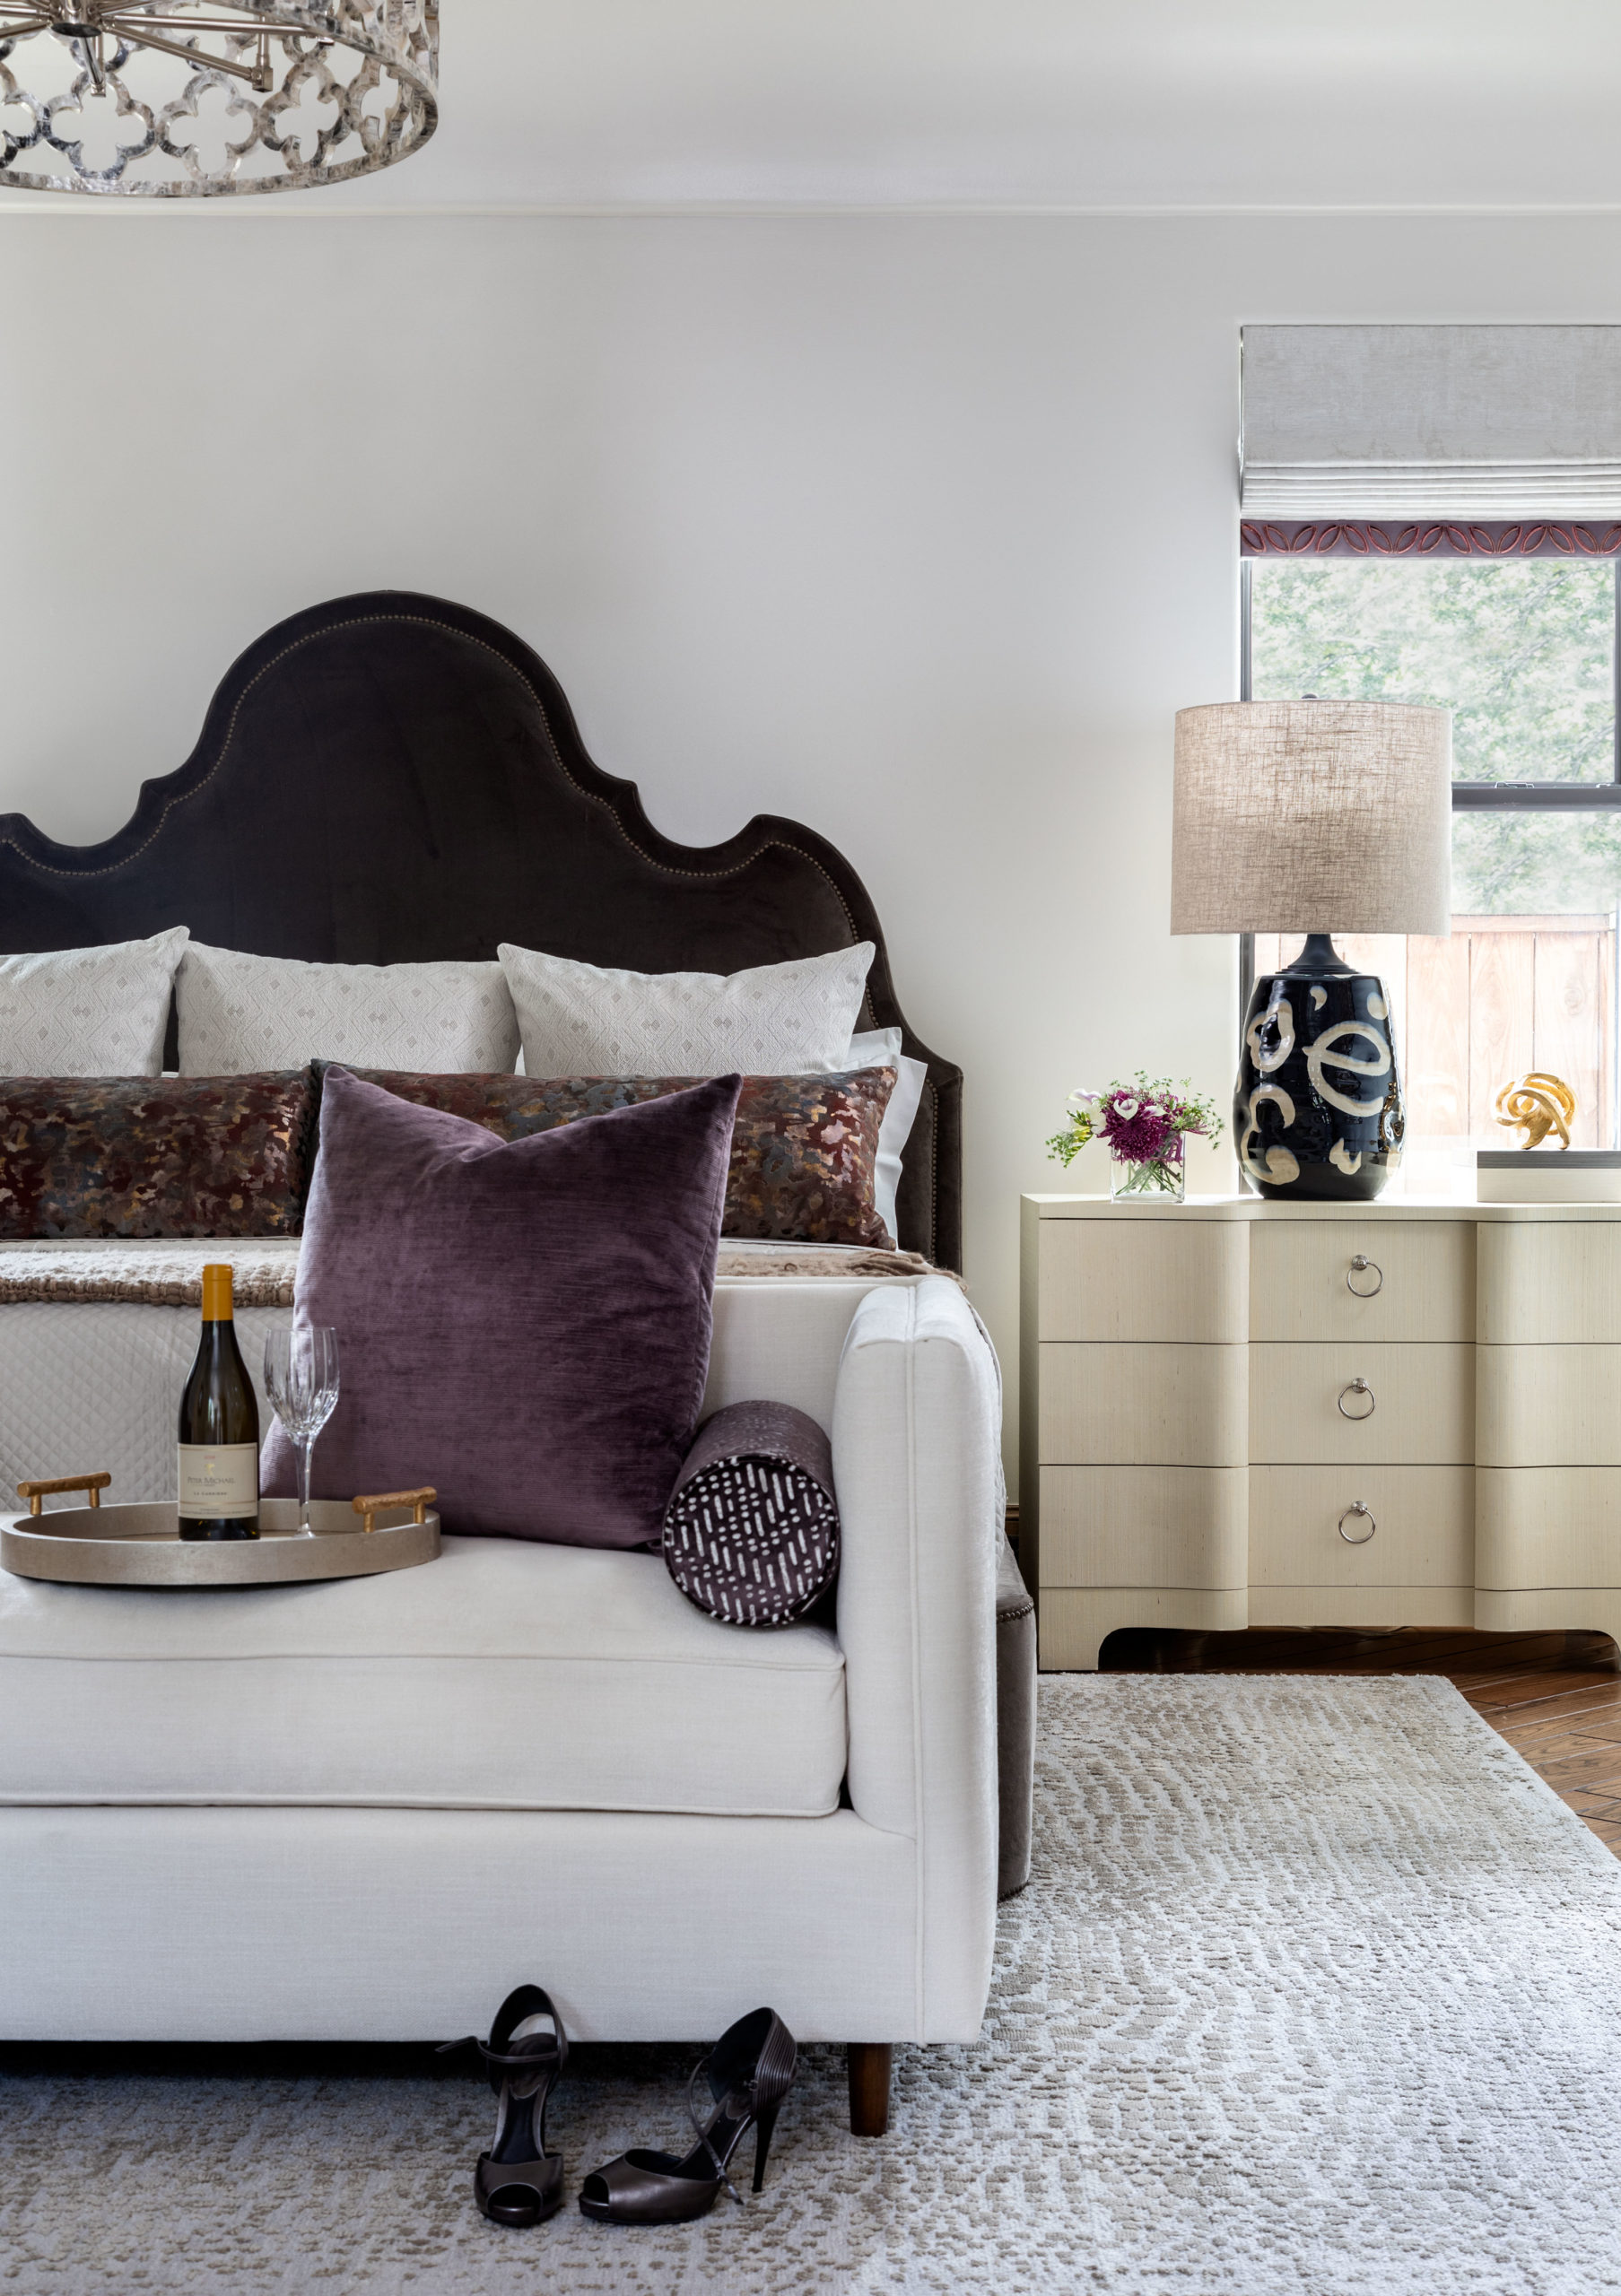 A Master bedroom with curved headboard and soft bench with lamp and nightstand